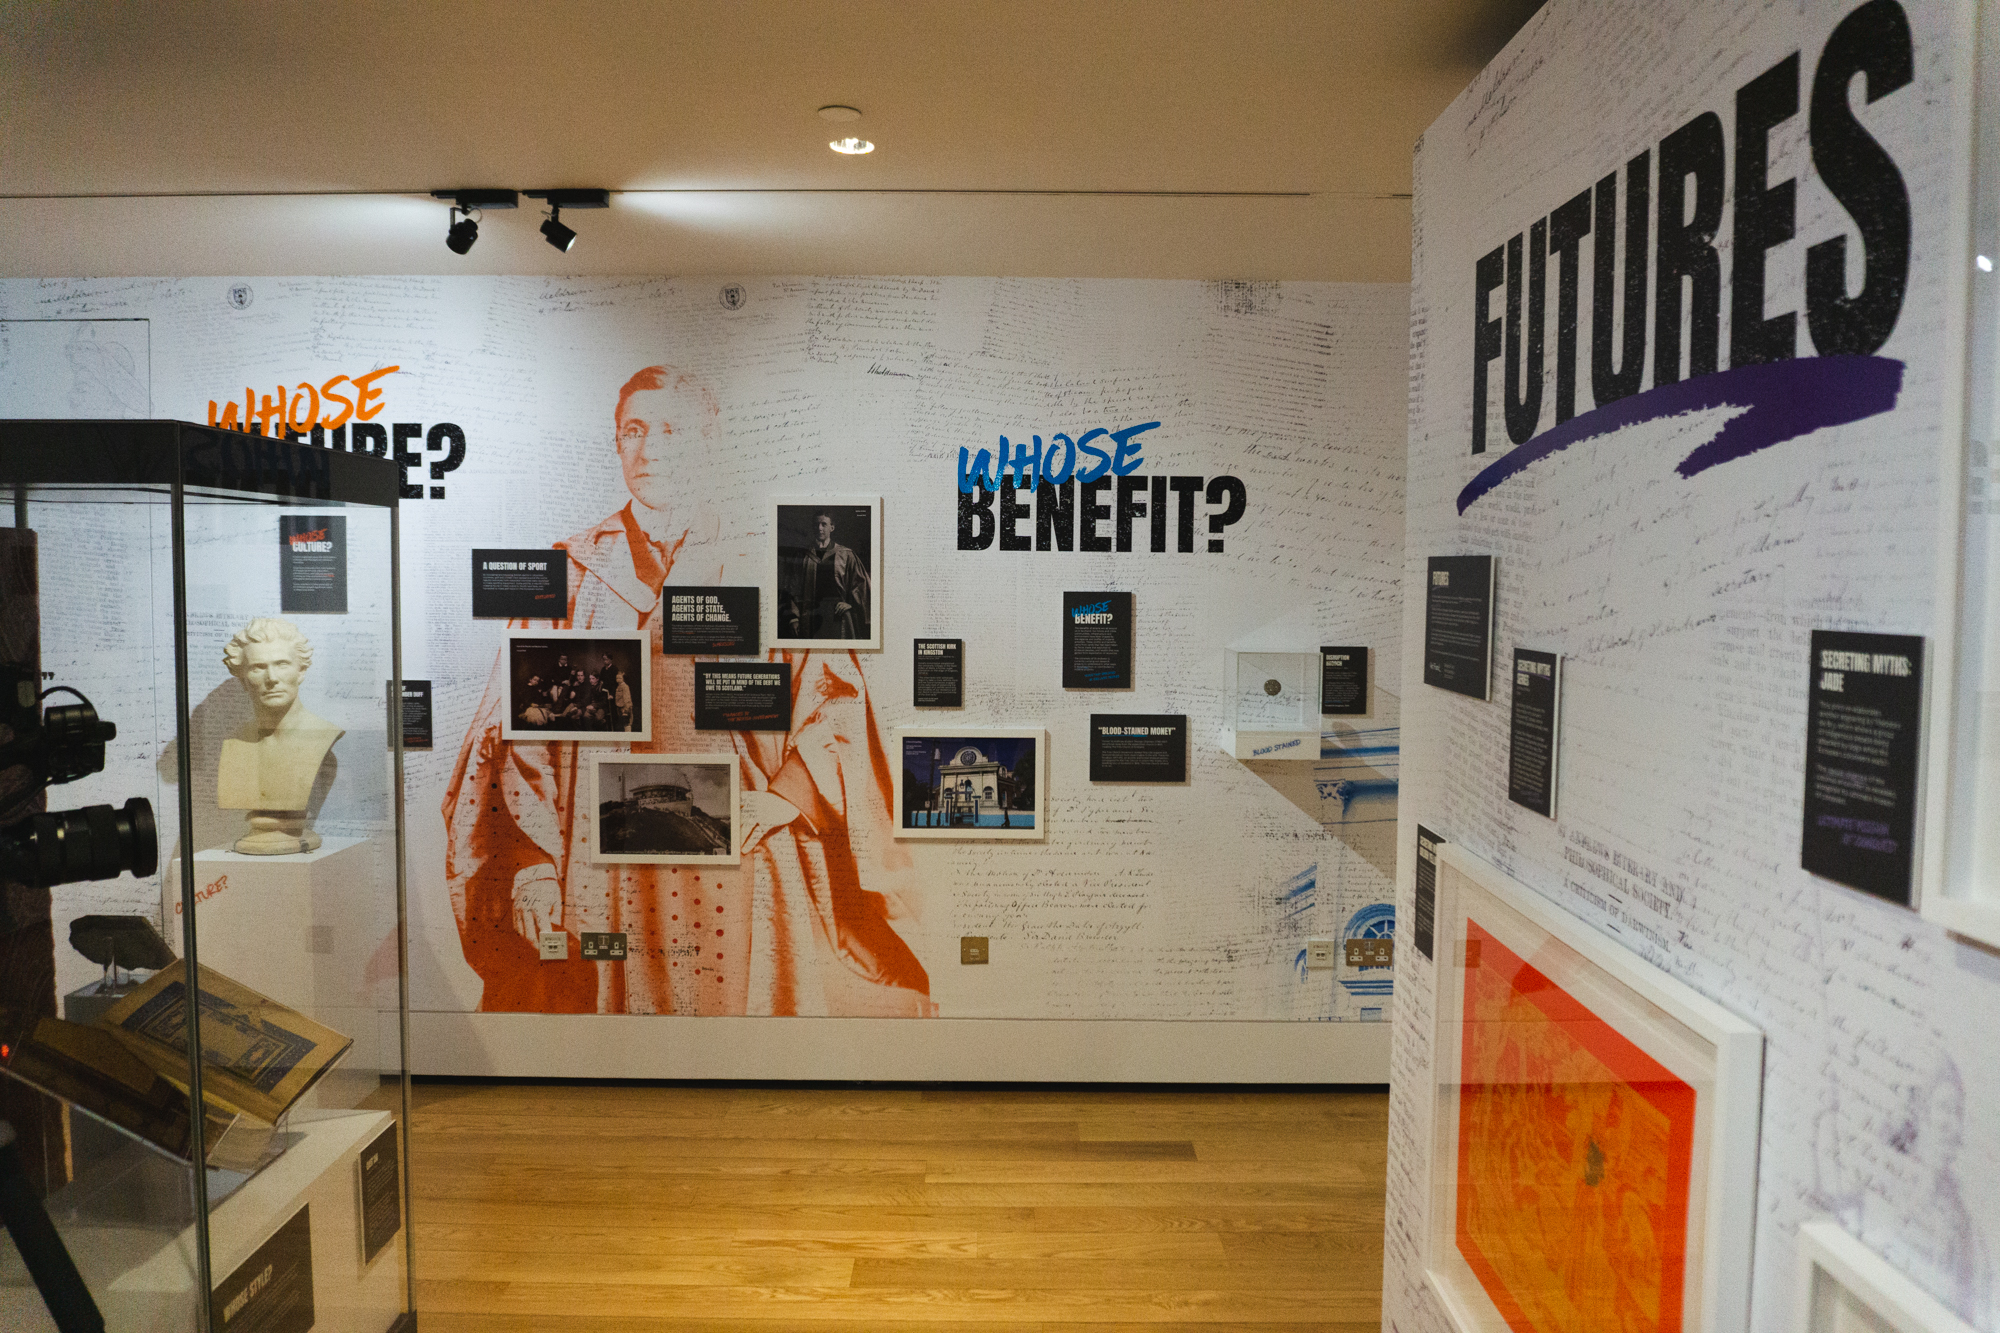 Picture shows items in the Wardlaw museum with signage behind reading 'Whose benefit'